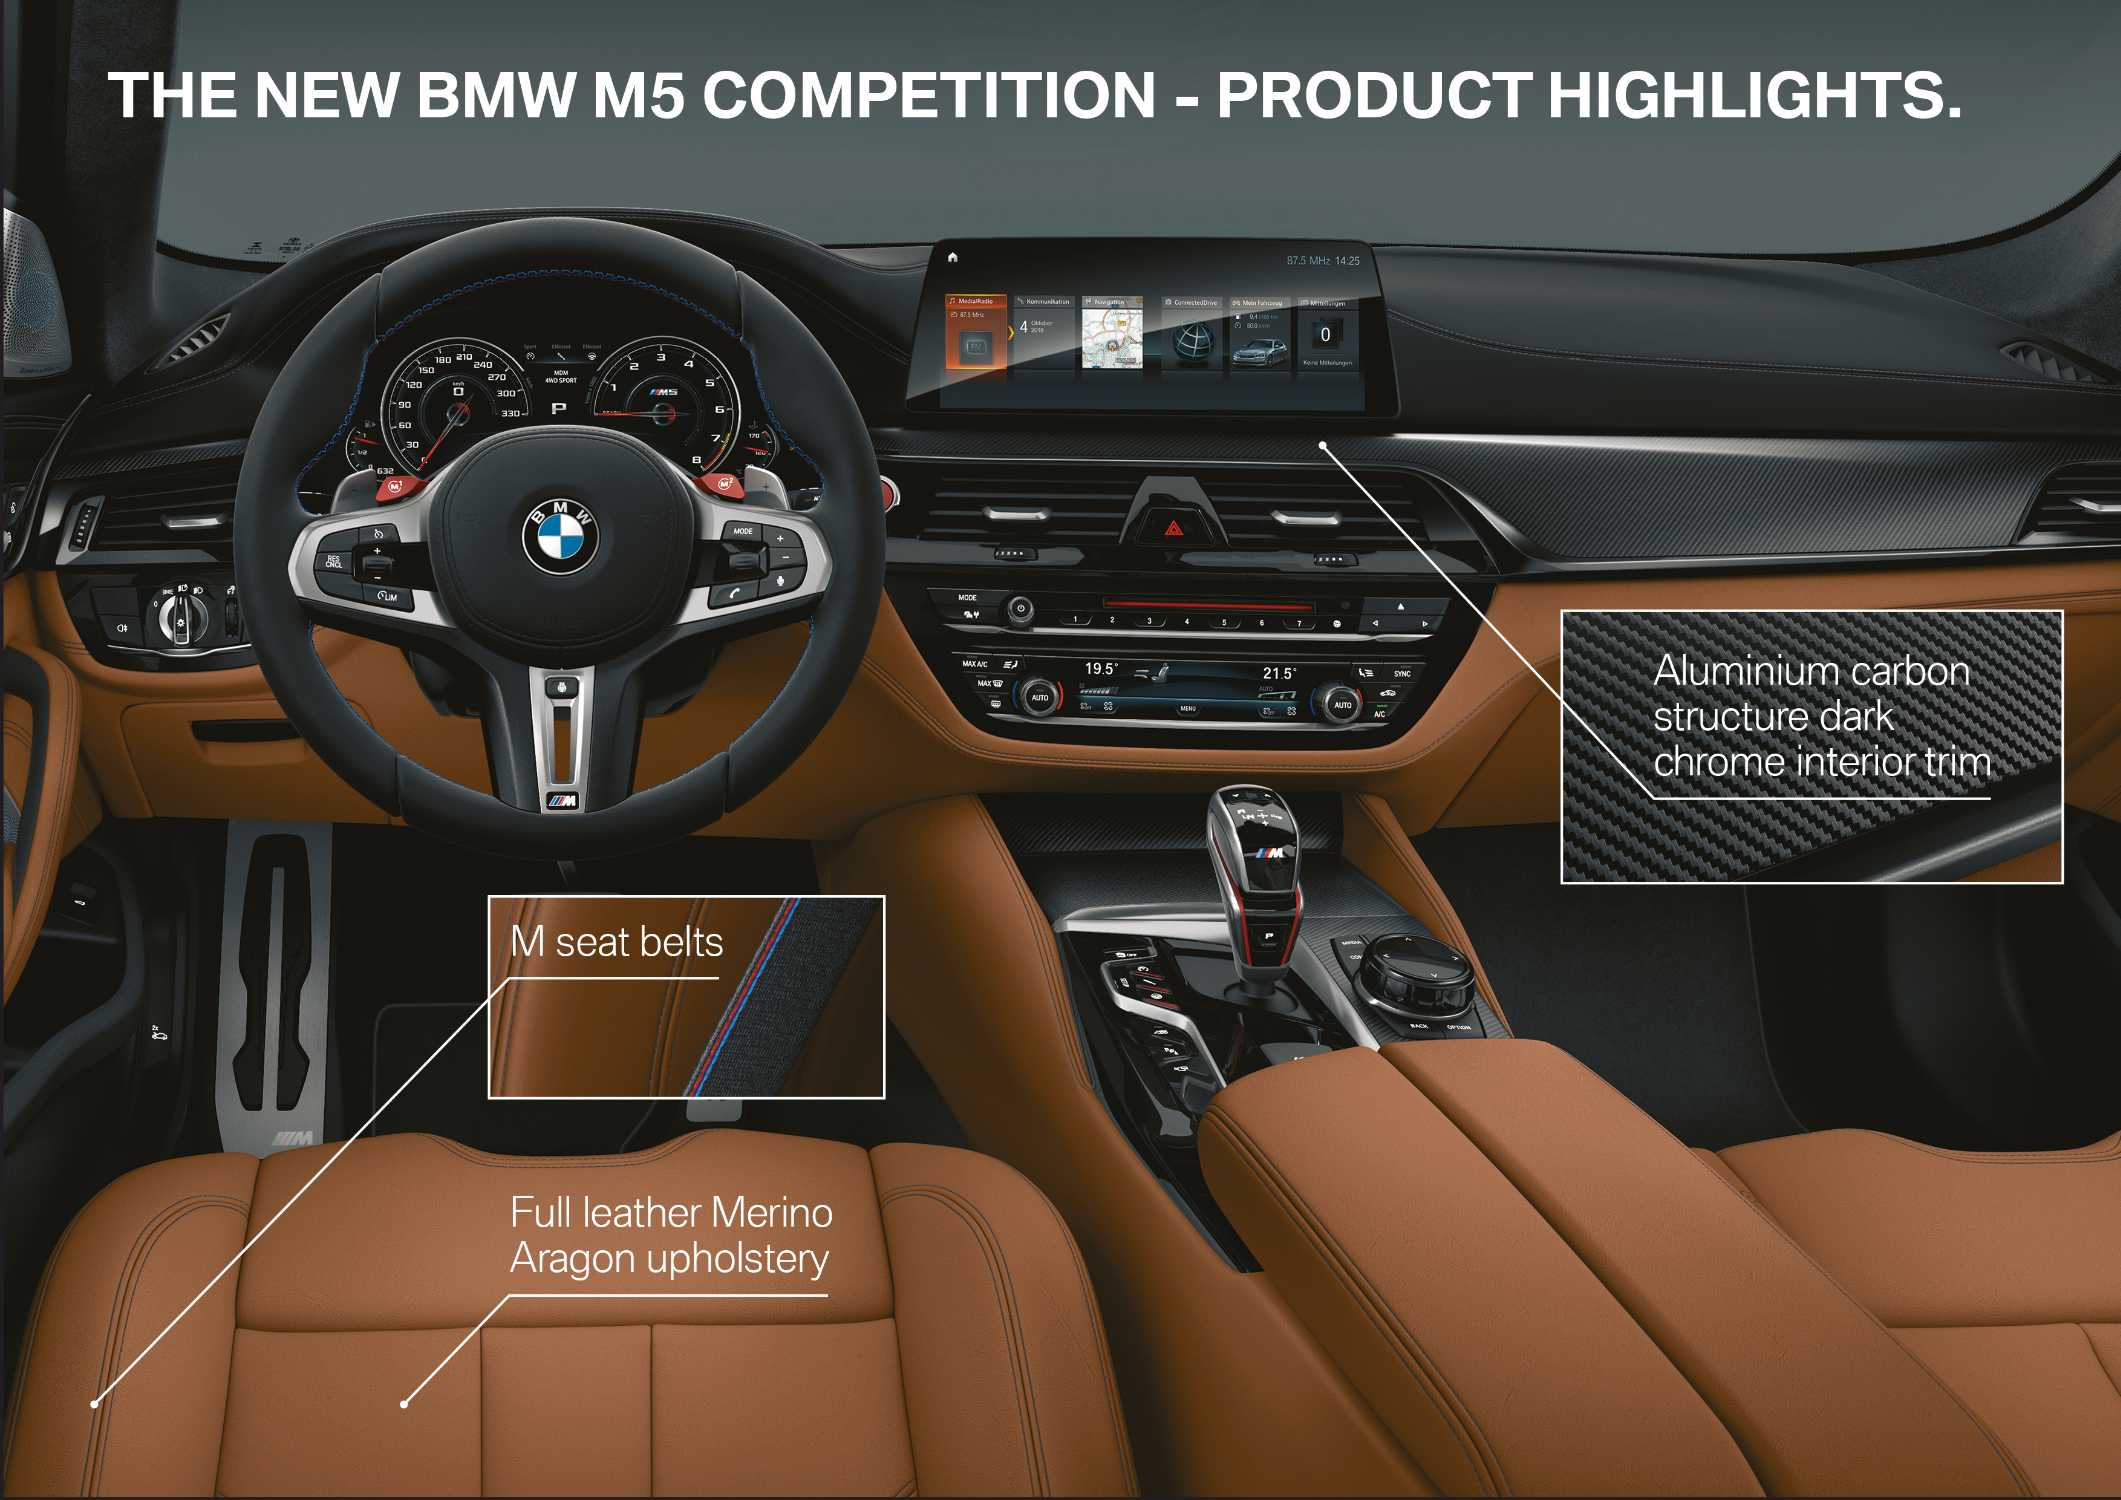 The new BMW M5 Competition (05/2018).